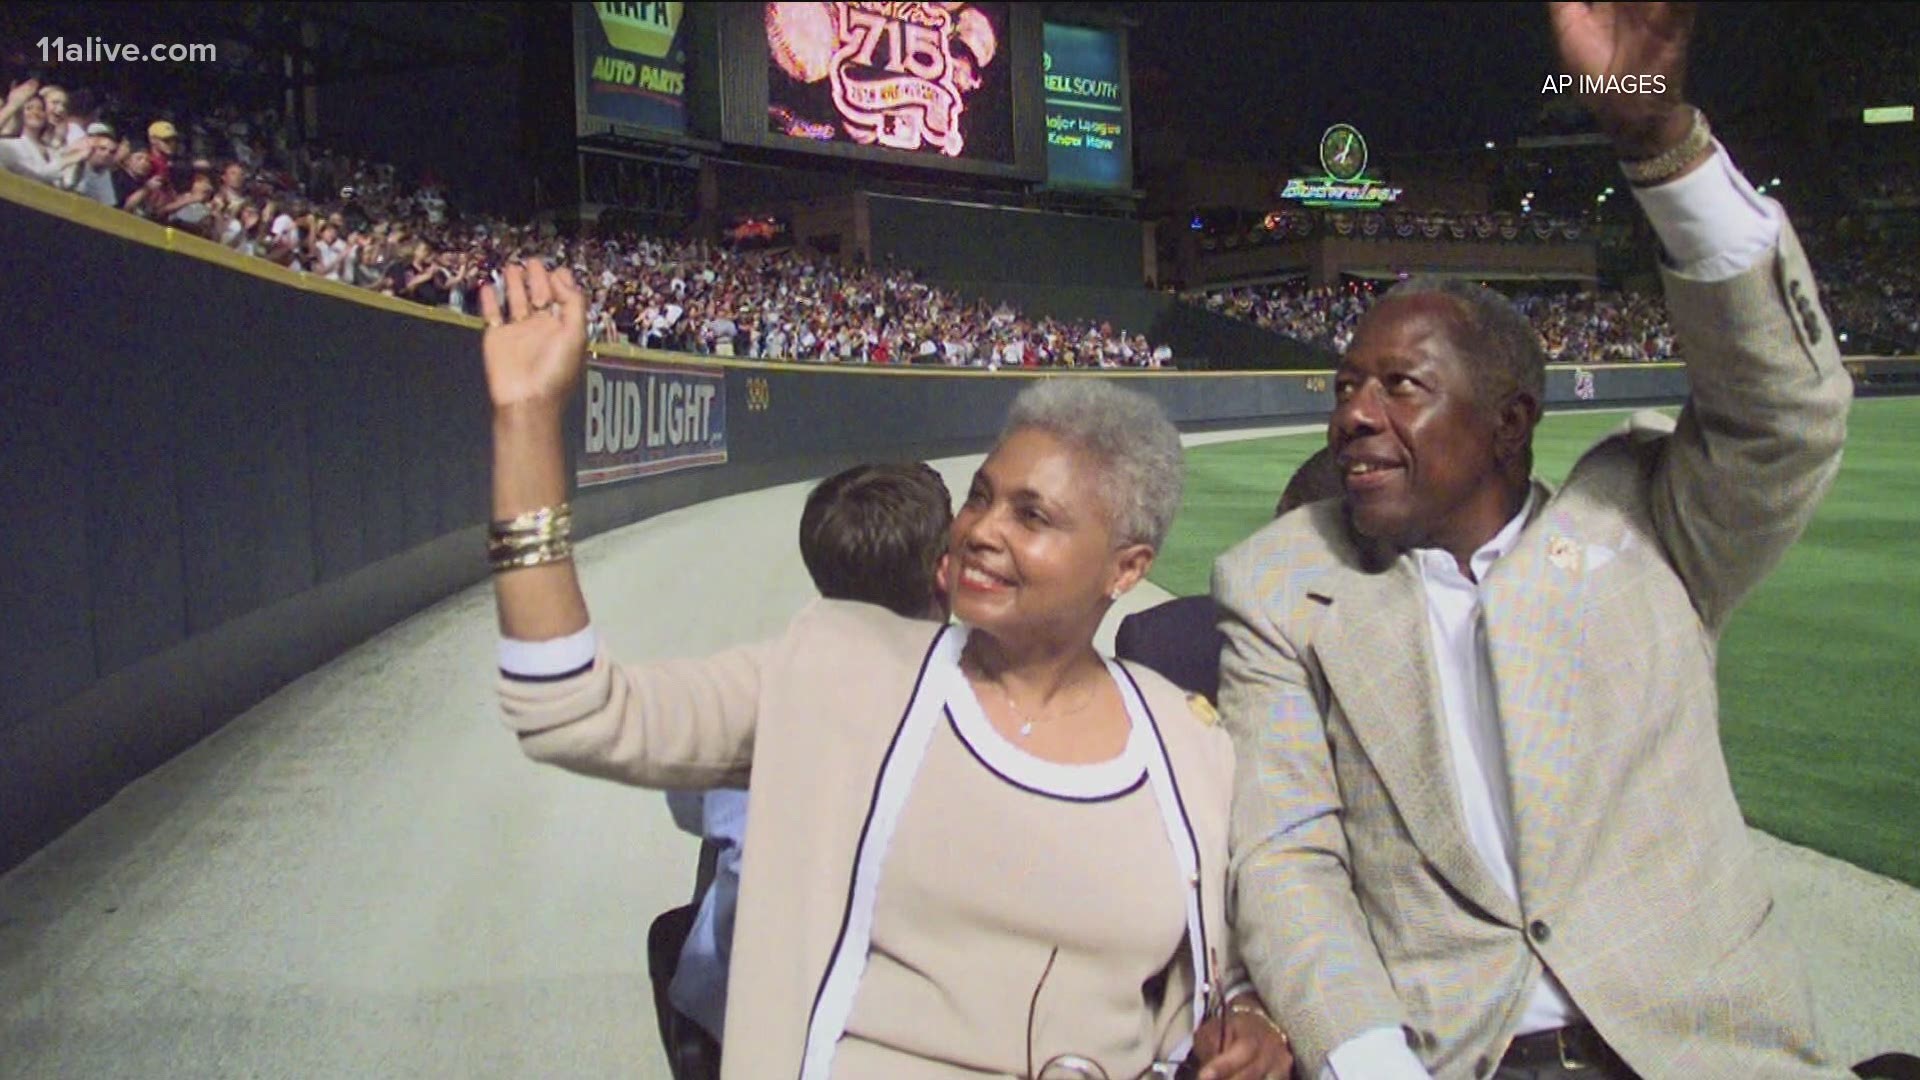 There's no question Hank Aaron's legacy extends far beyond the baseball. But he hoped he would be known for his passionate support of young people.